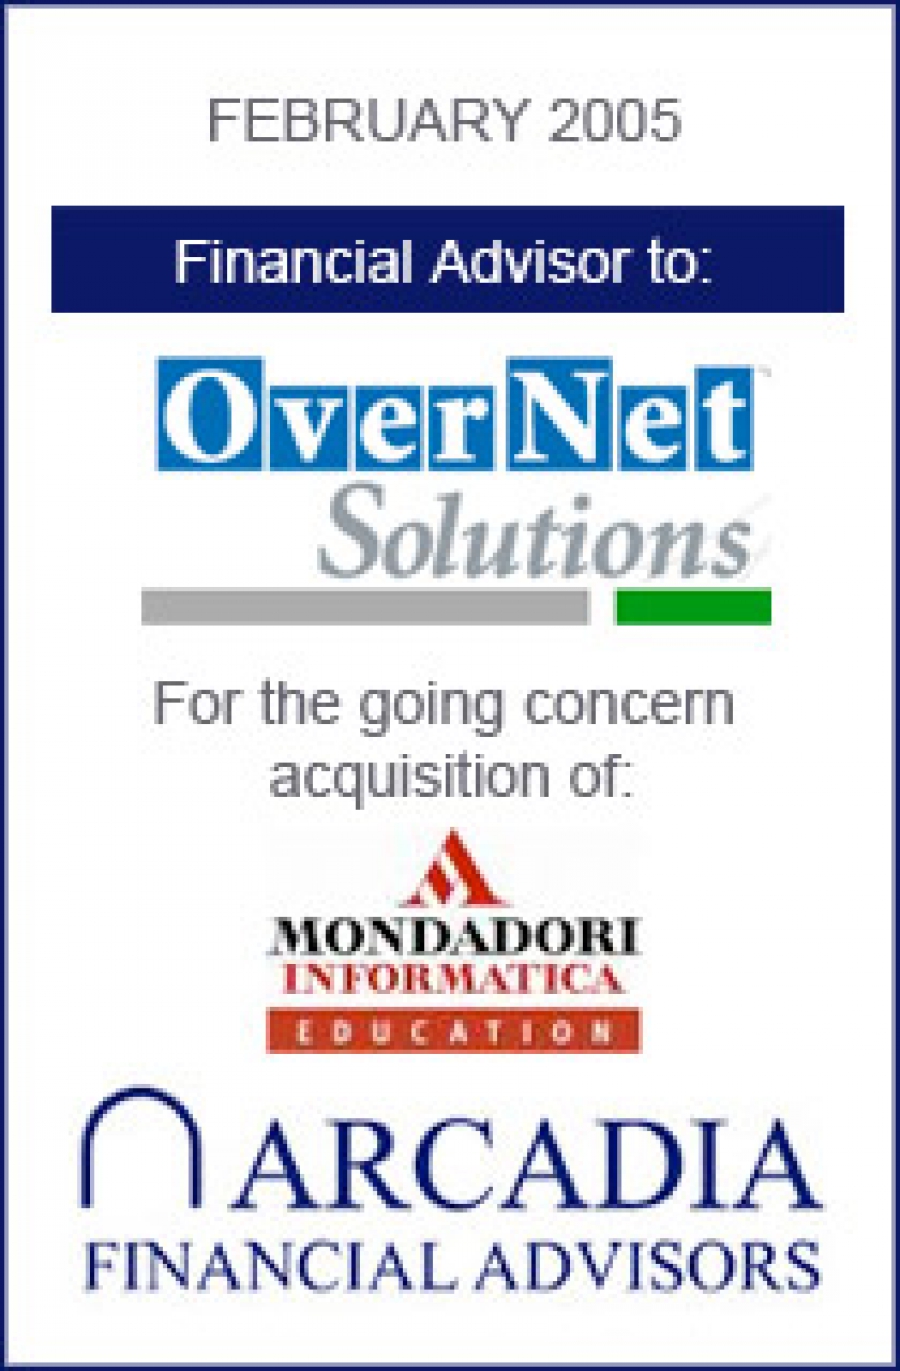 Transaction completed with OverNet Solutions